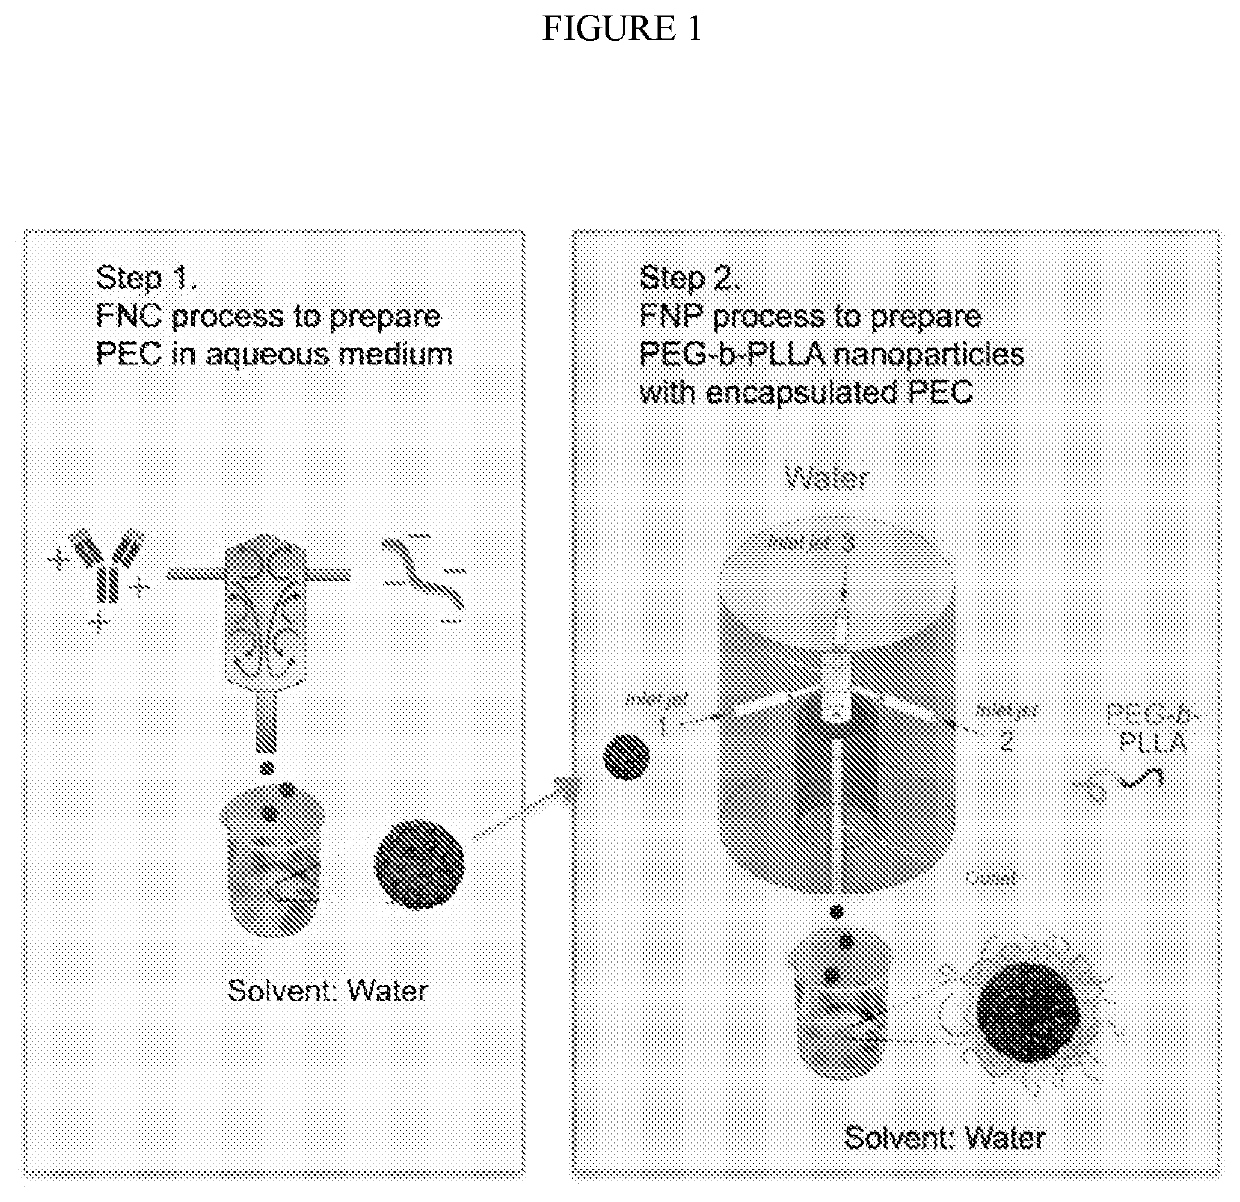 Polymeric nanoparticle compositions for encapsulation and sustained release of protein therapeutics